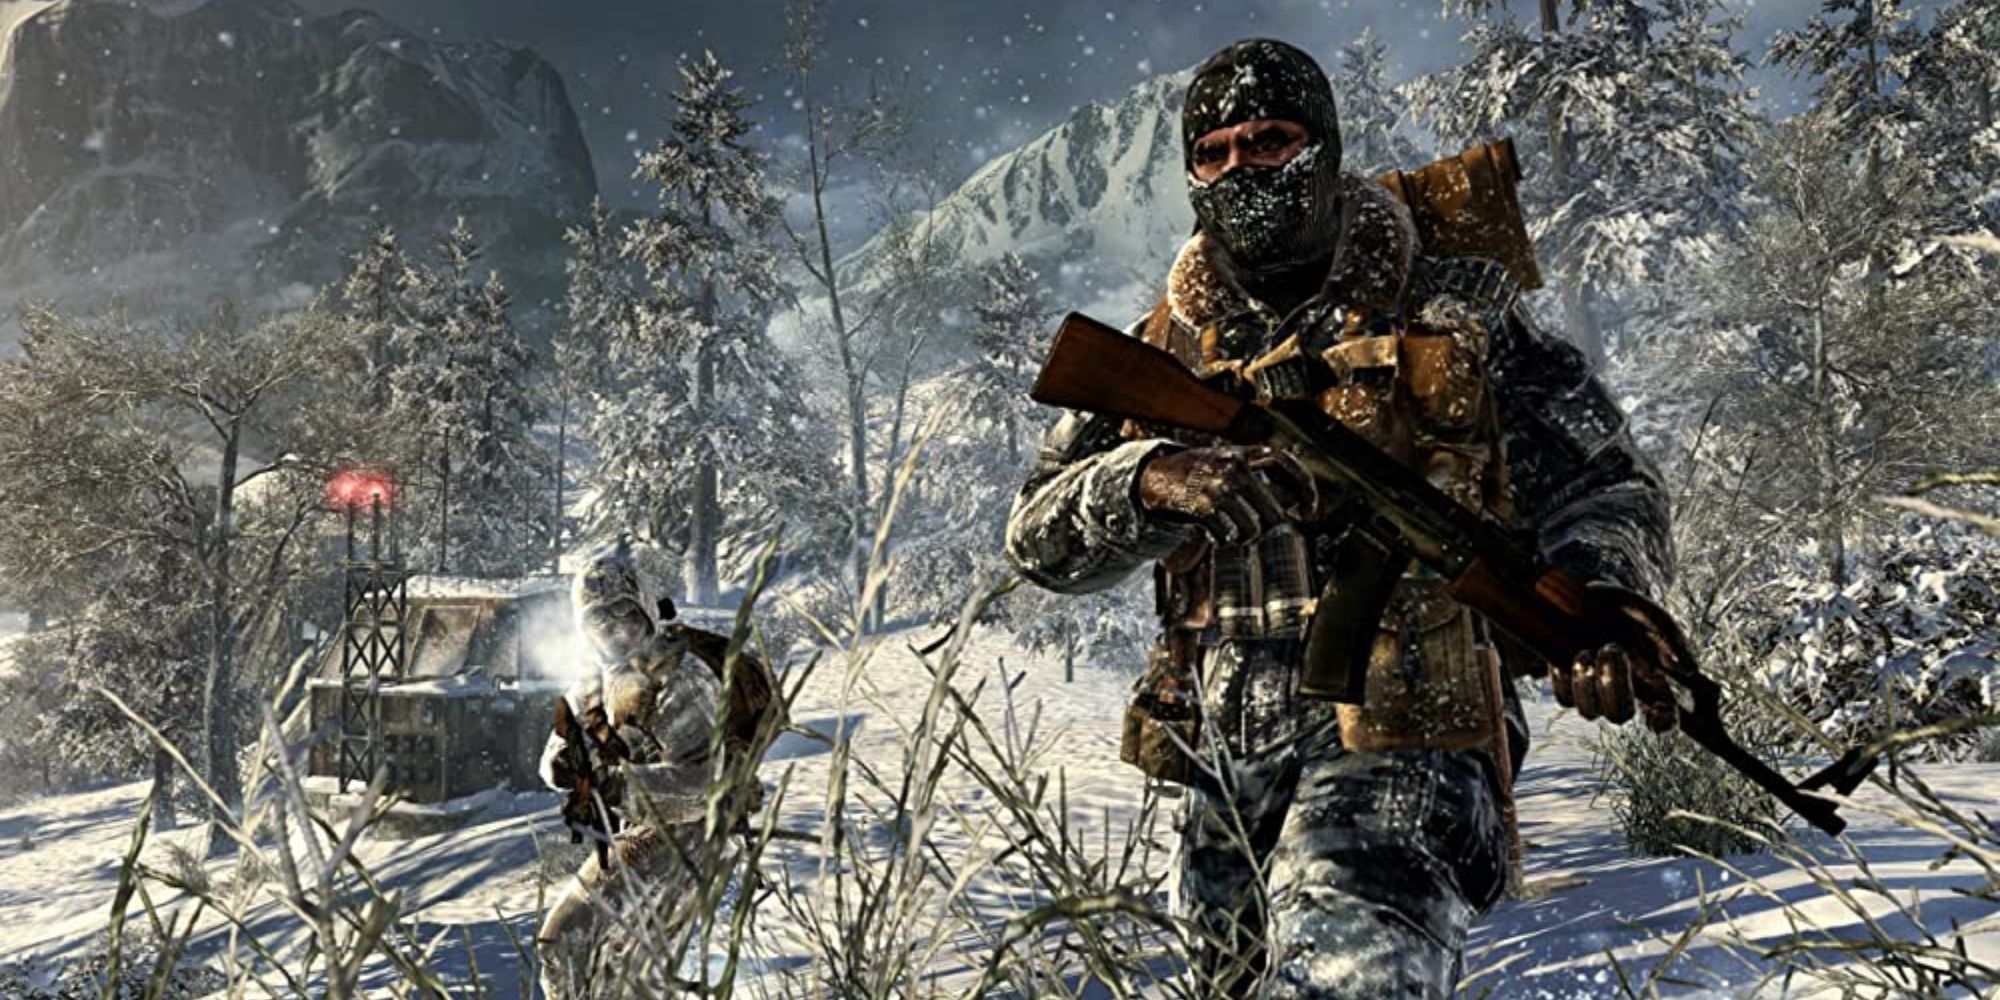 The black treyarch code patrols the enemy in the single player campaign